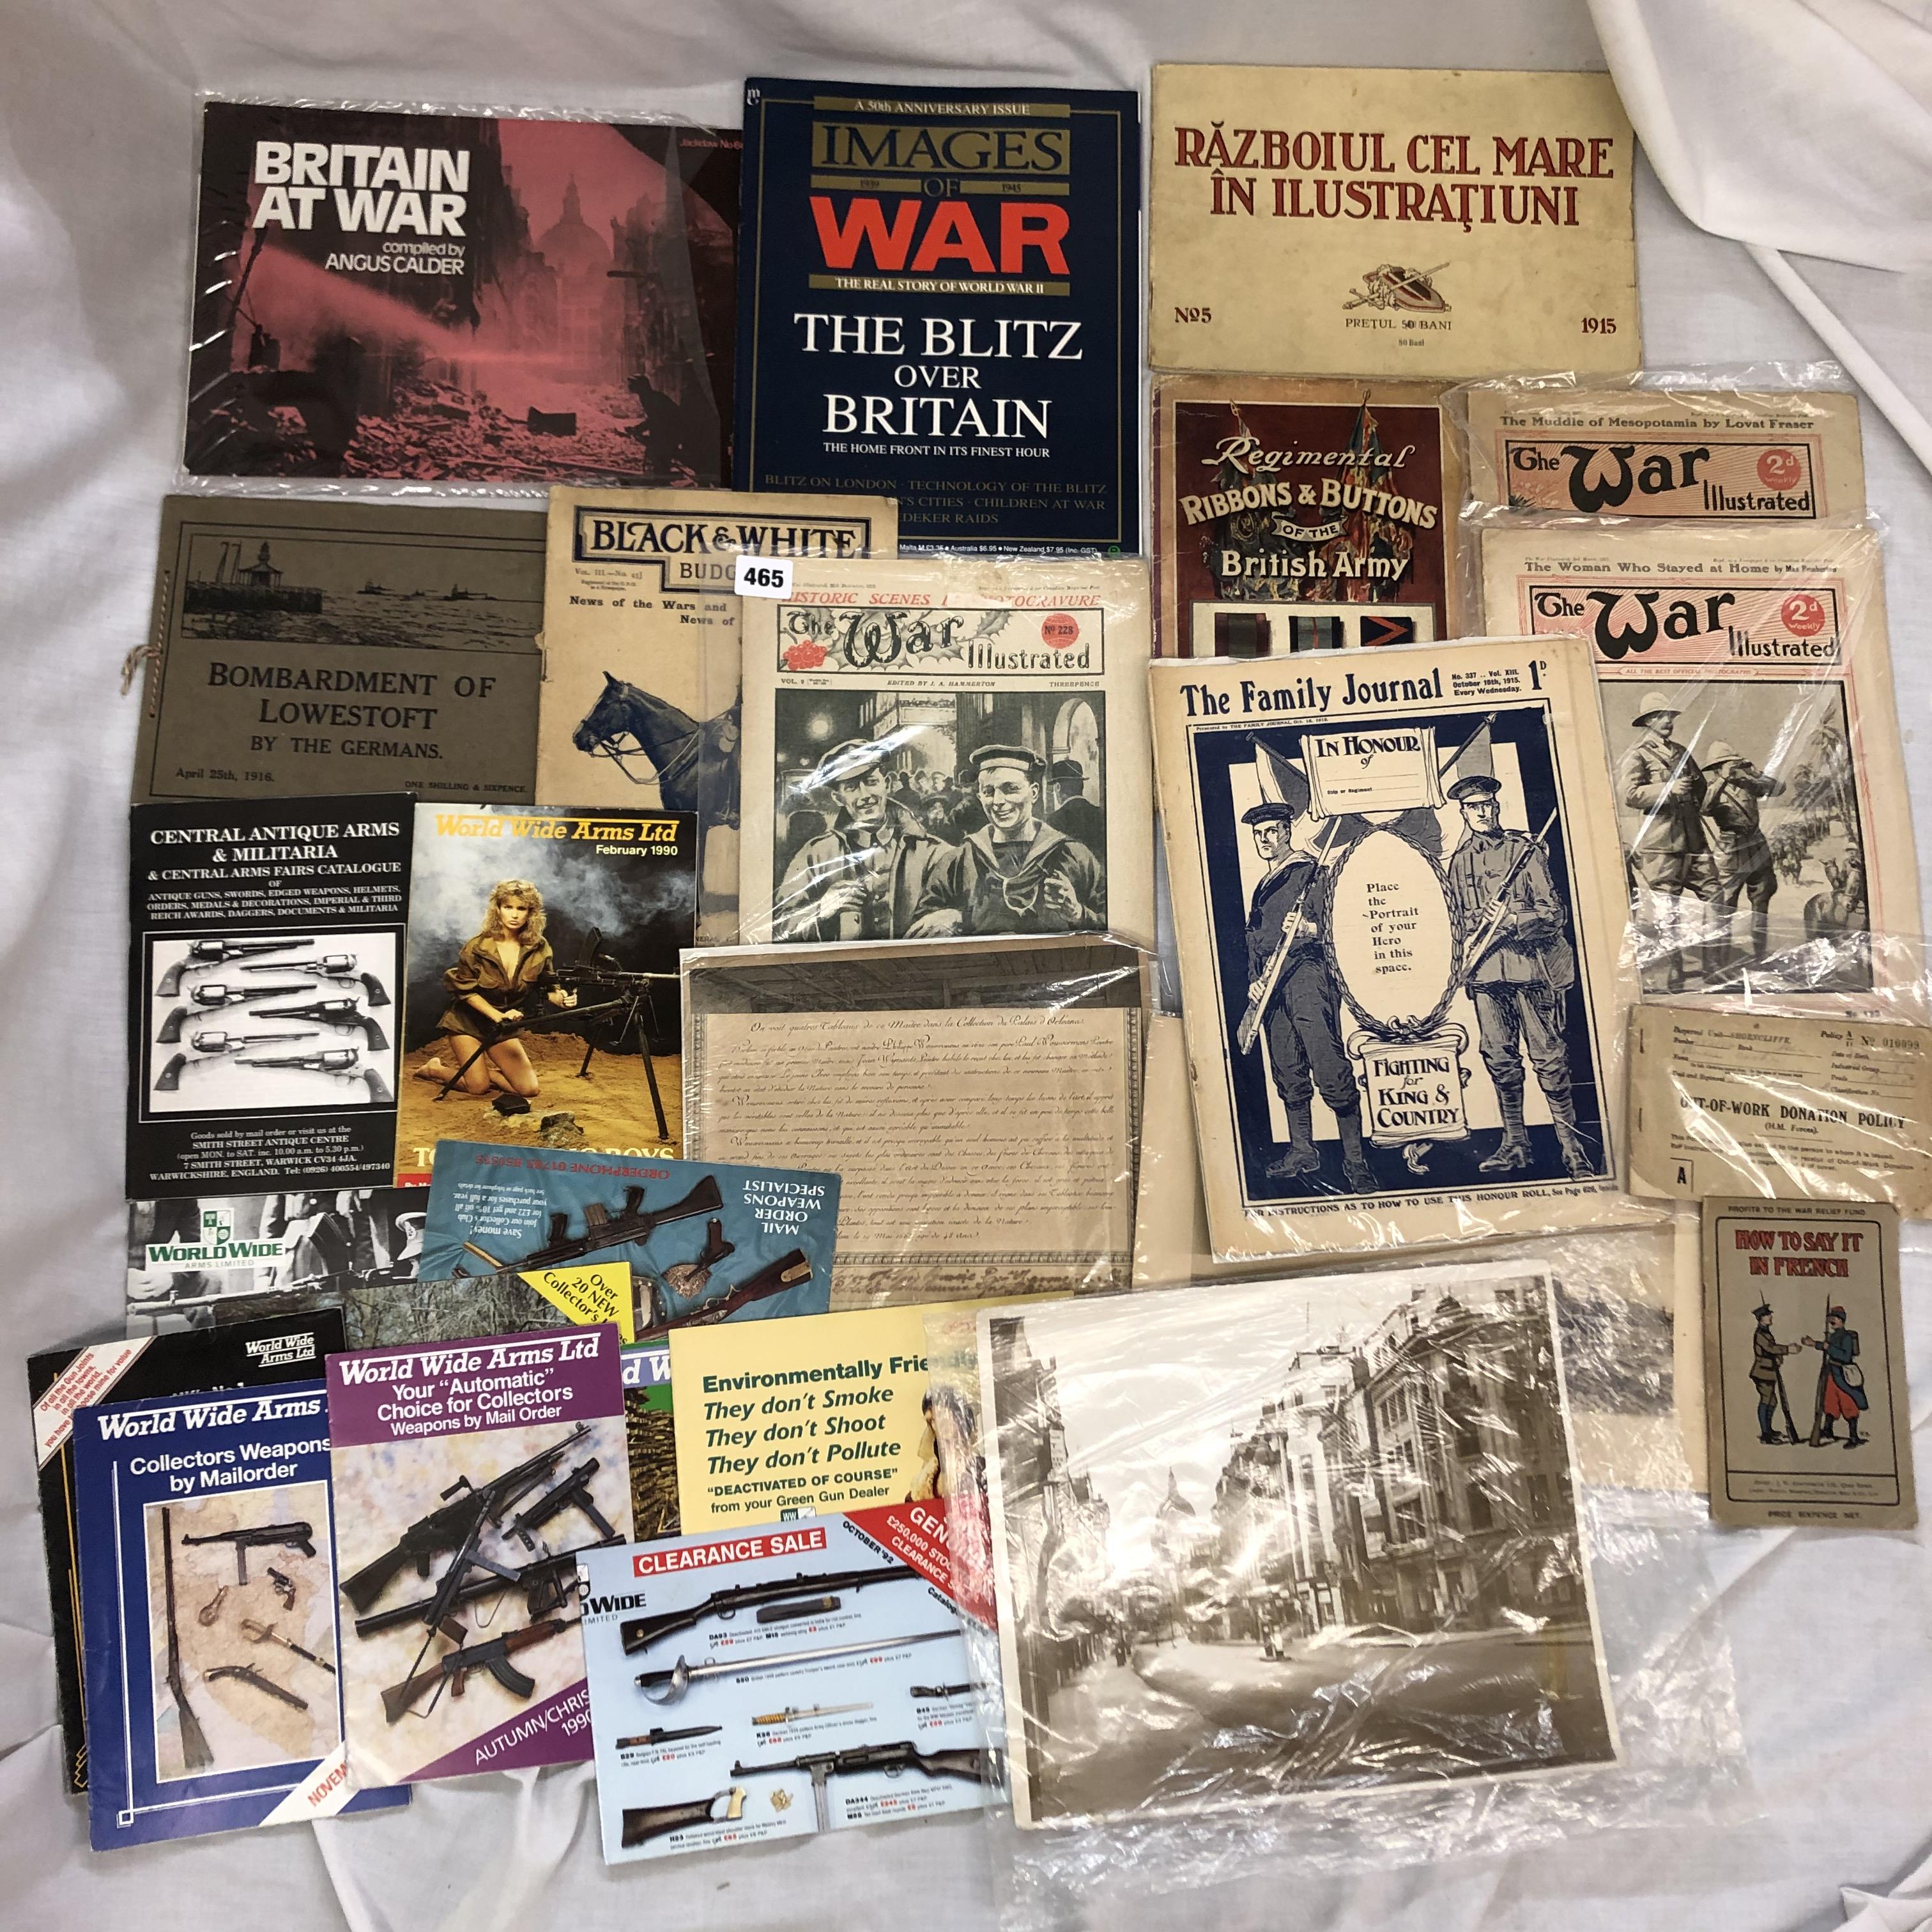 WWI RELATED EPHEMERA INCLUDING COPIES OF THE WAR ILLUSTRATED, THE FAMILY JOURNAL,